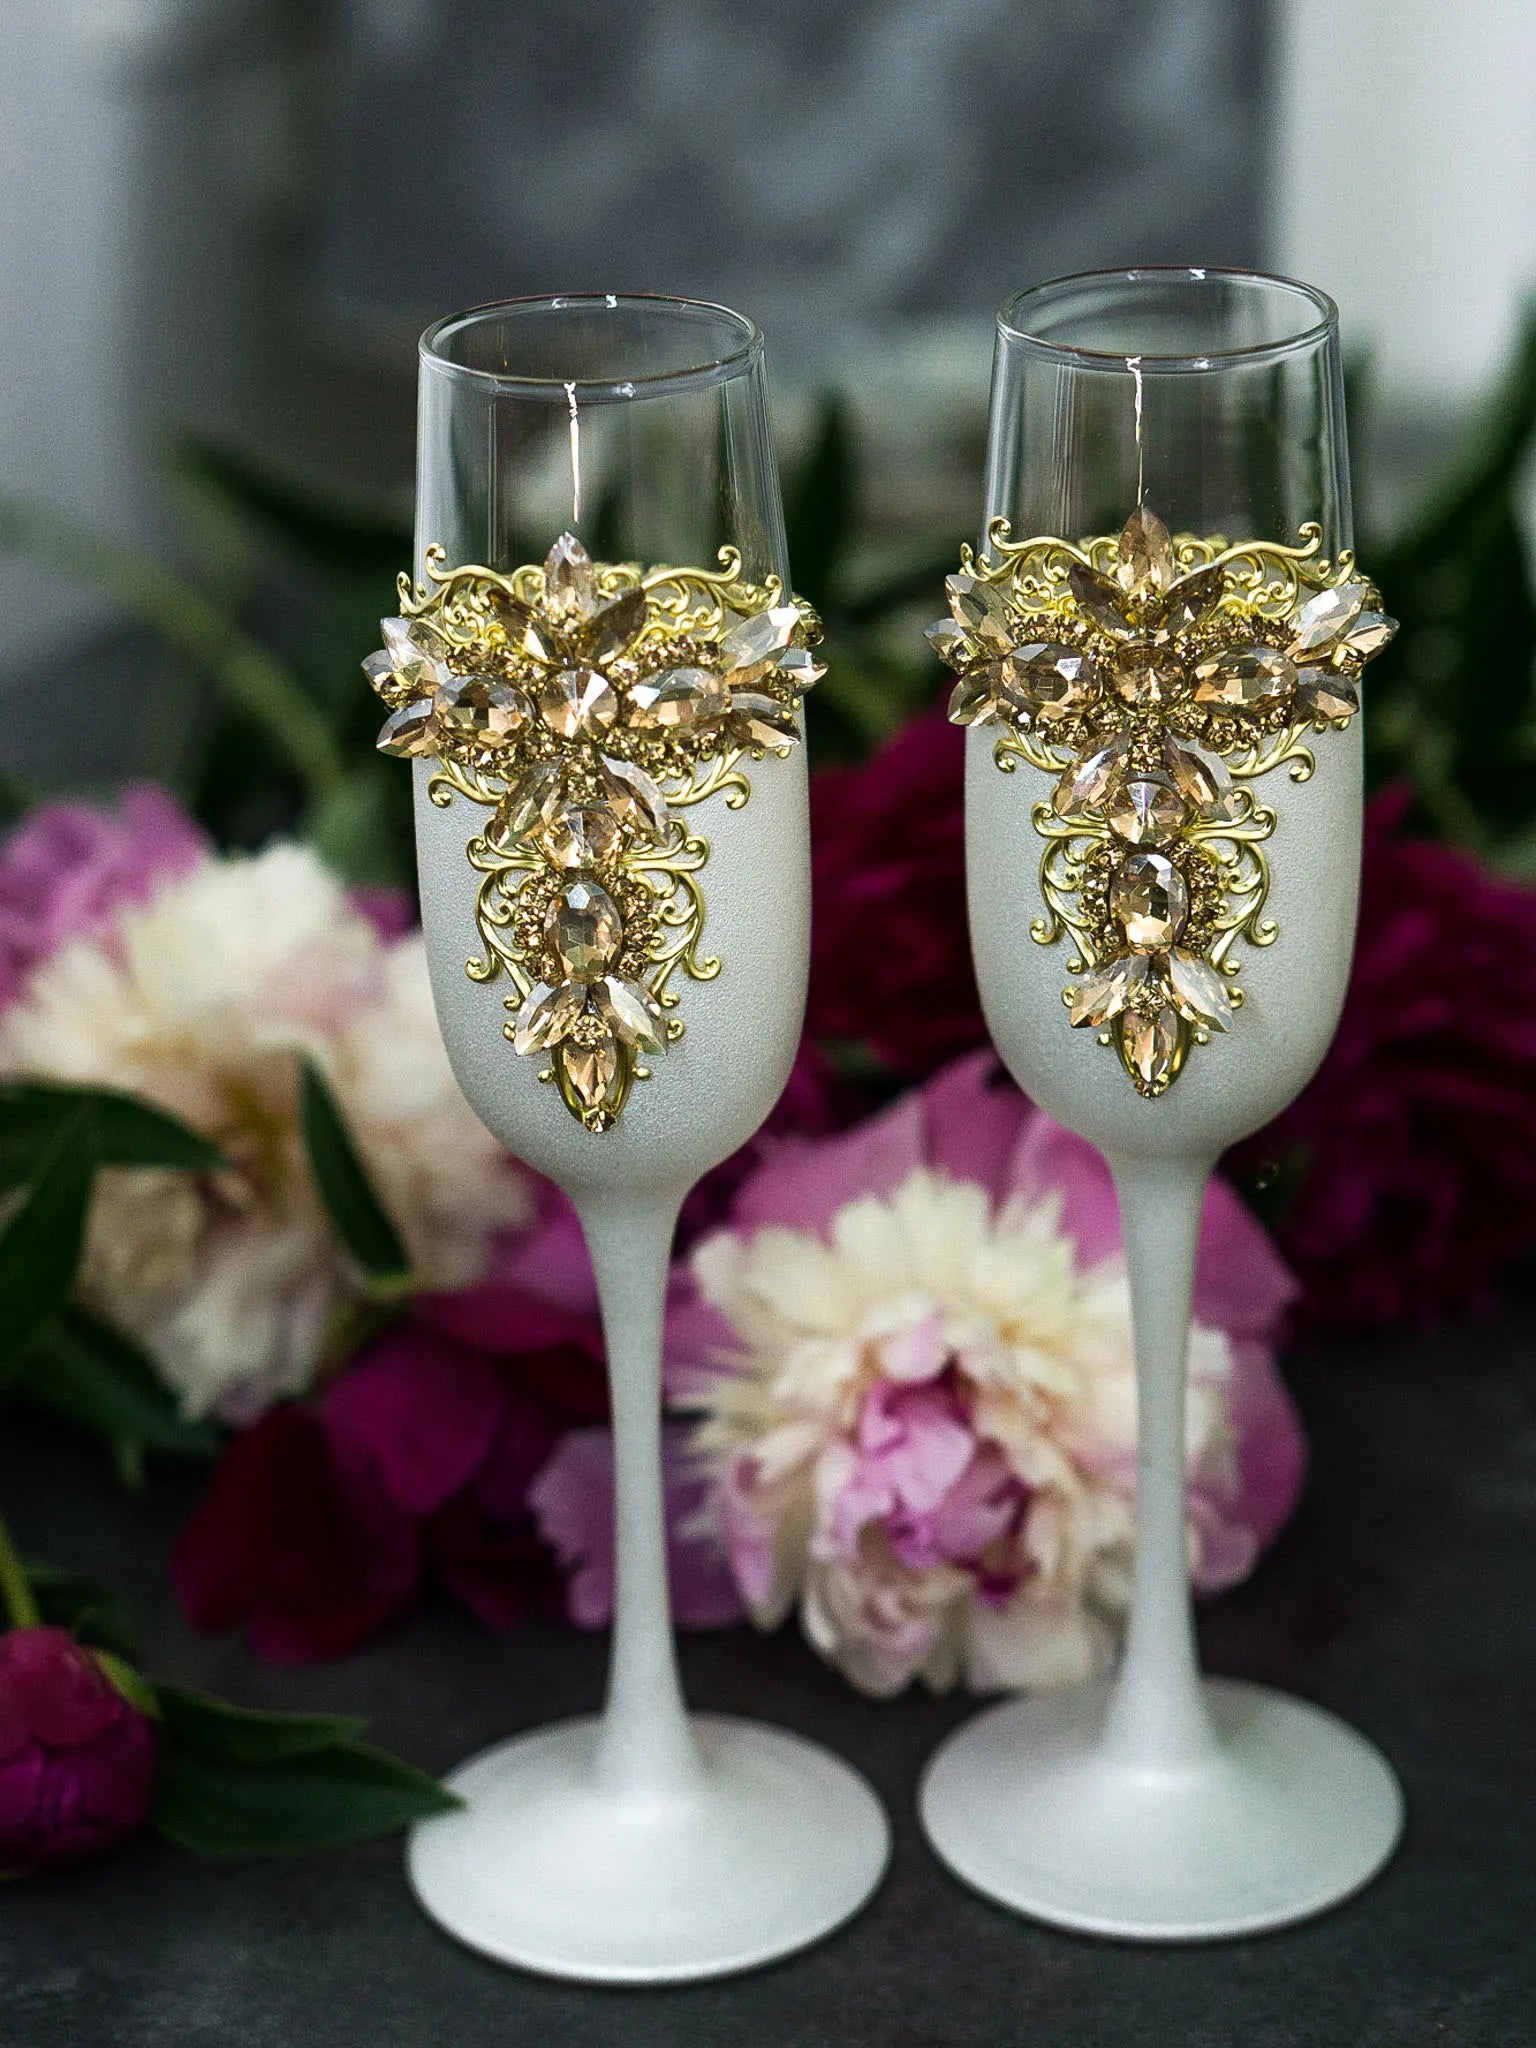 Custom wedding flutes with personalized engraving options